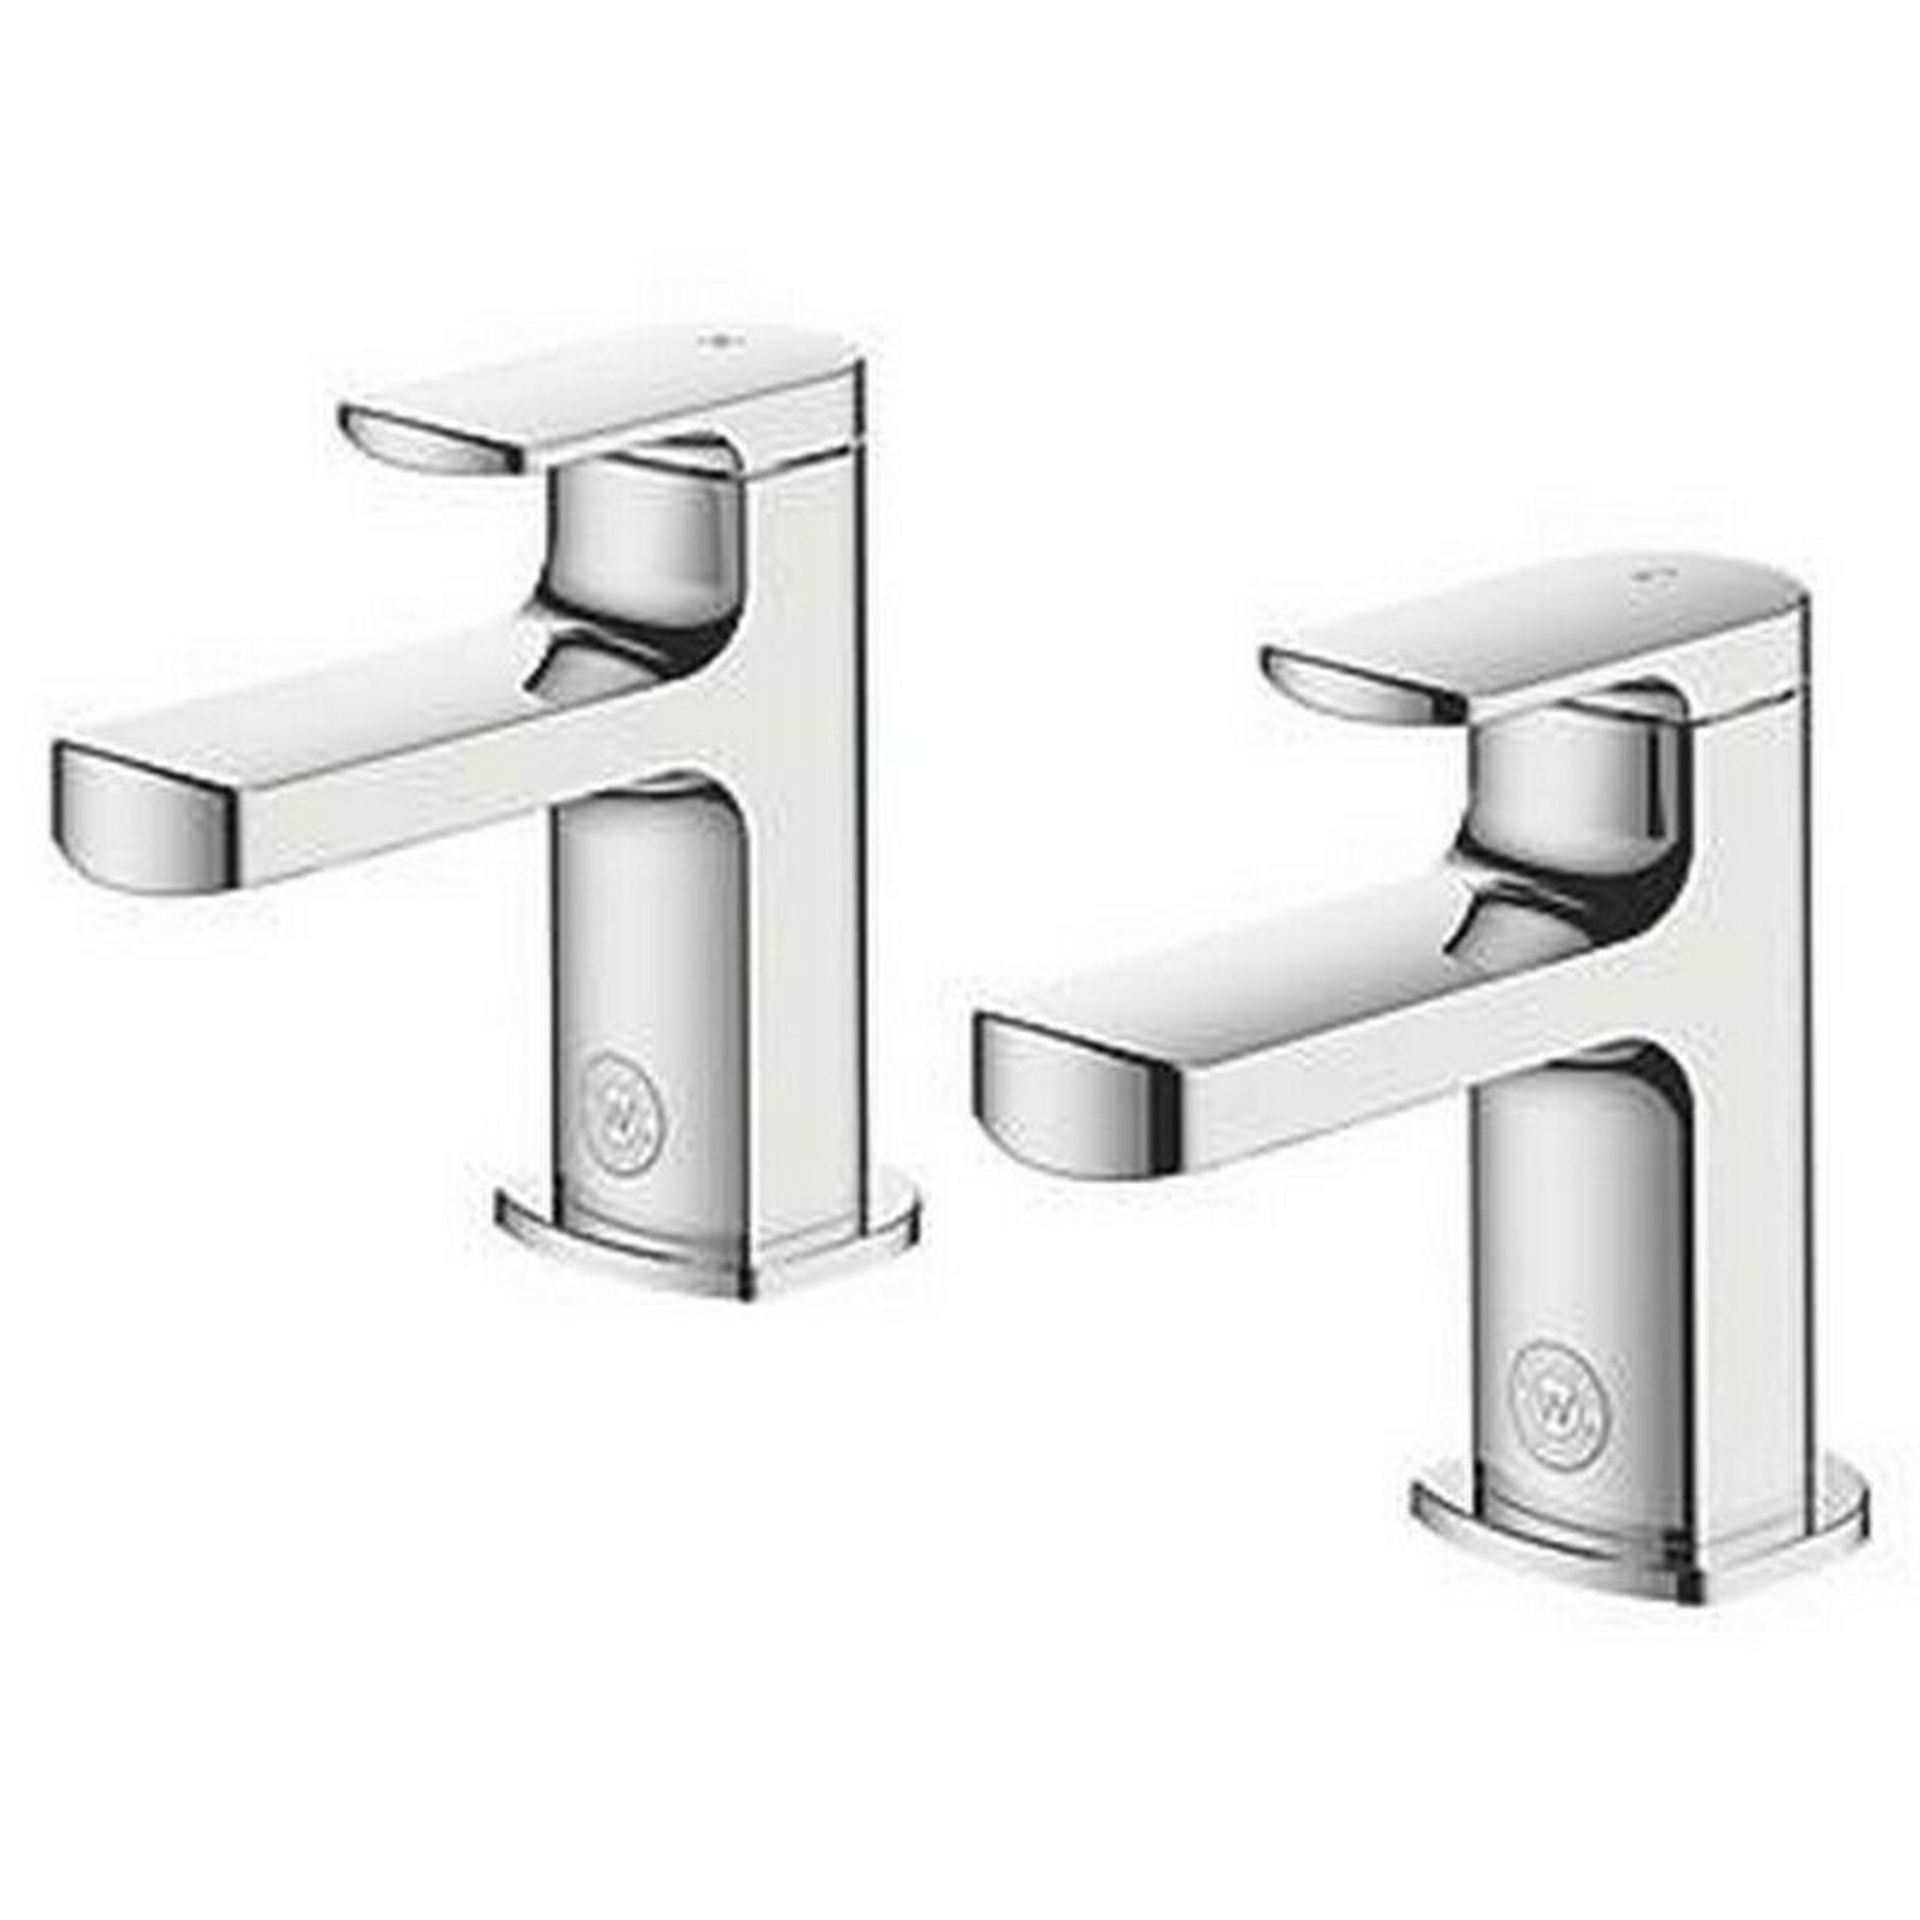 New (P156) Watersmith Heritage Clyde Bath Taps Pair ¼ Turn Operation Suitable For High & Low ...